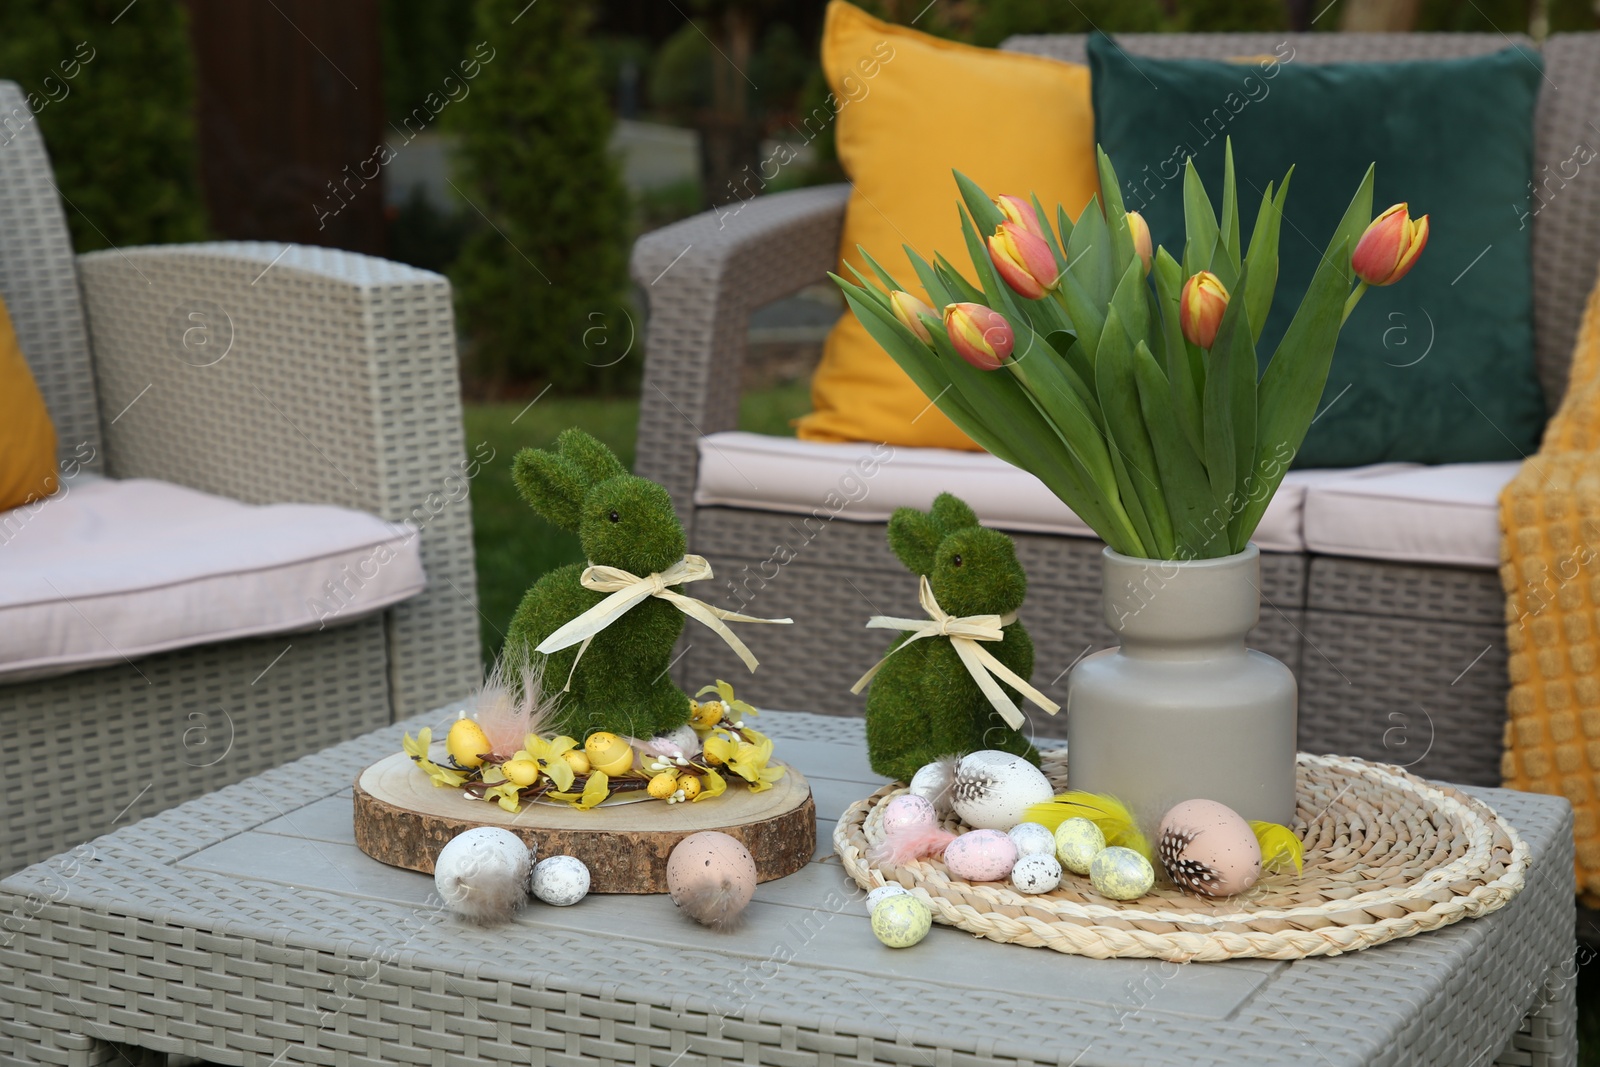 Photo of Terrace with Easter decorations. Bouquet of tulips in vase, bunny figures and decorative eggs on table outdoors